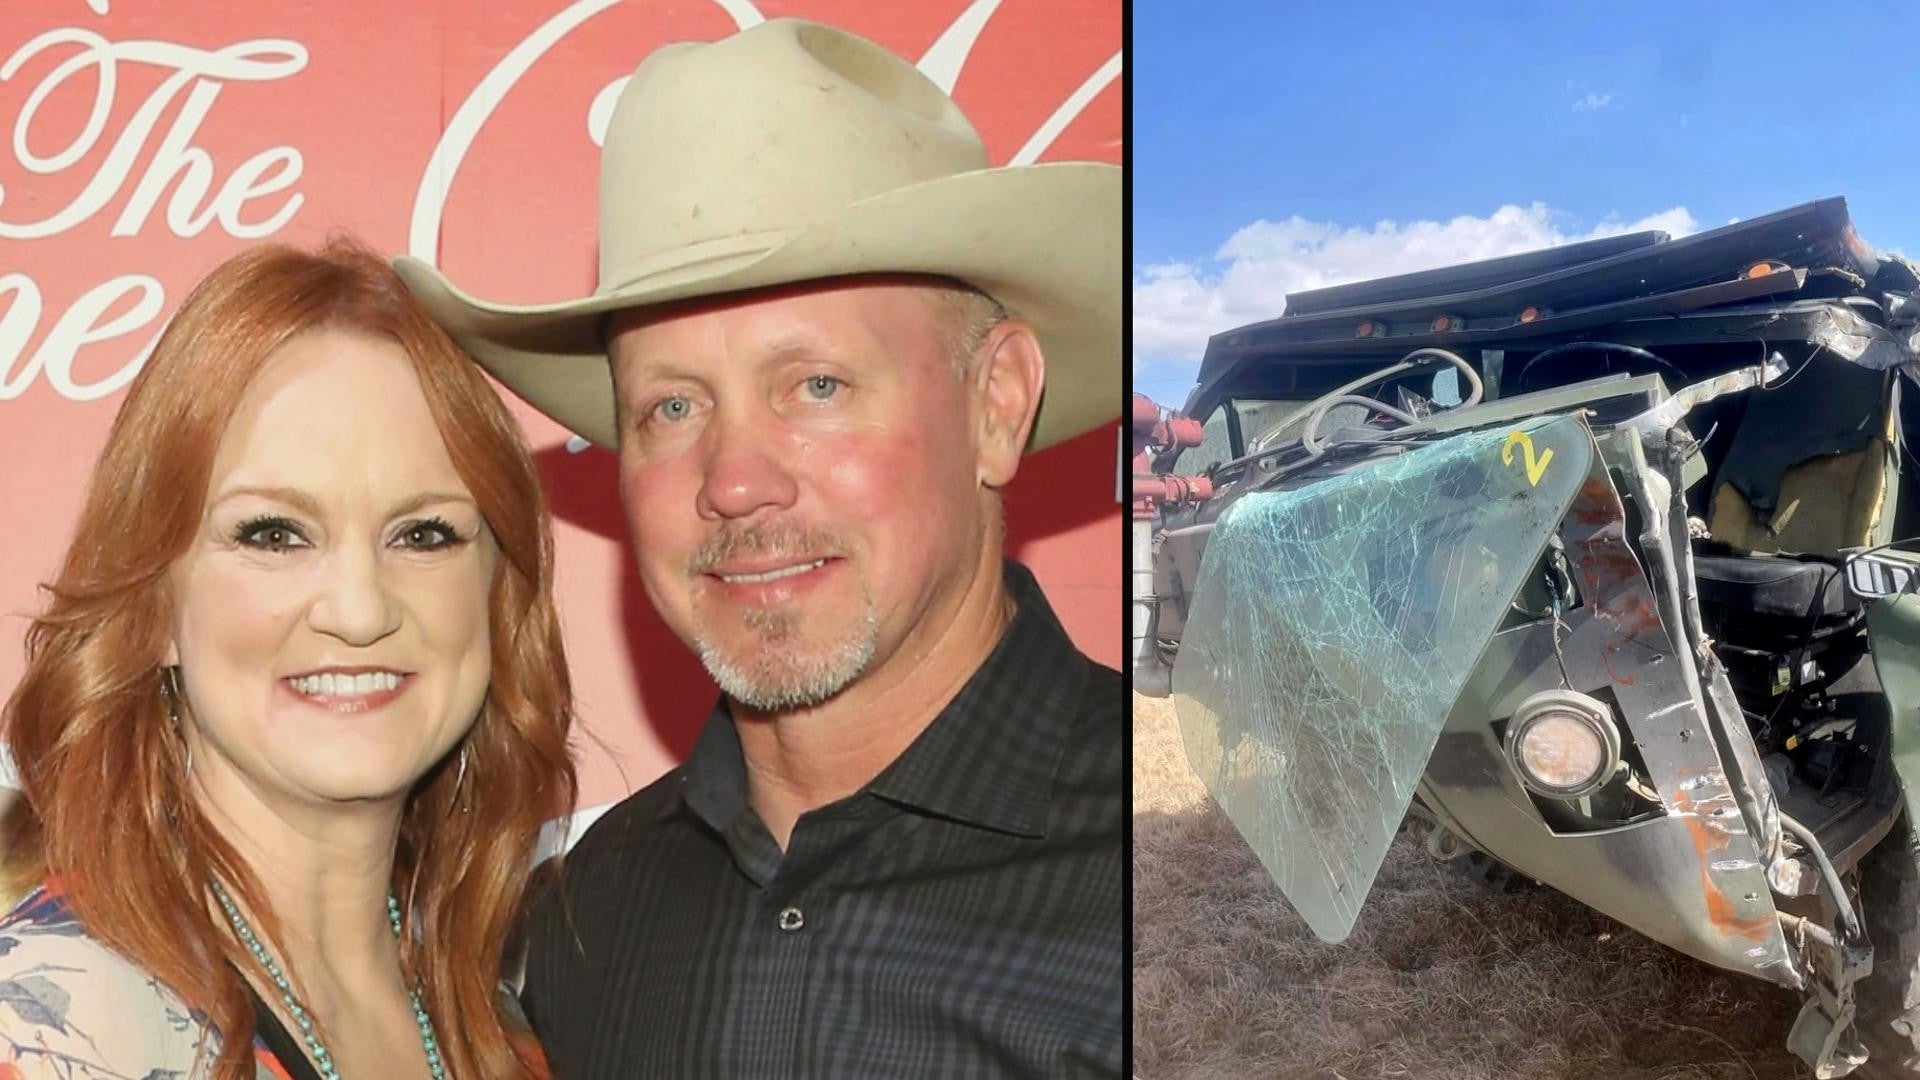 Pioneer Woman' Ree Drummond down 43 pounds